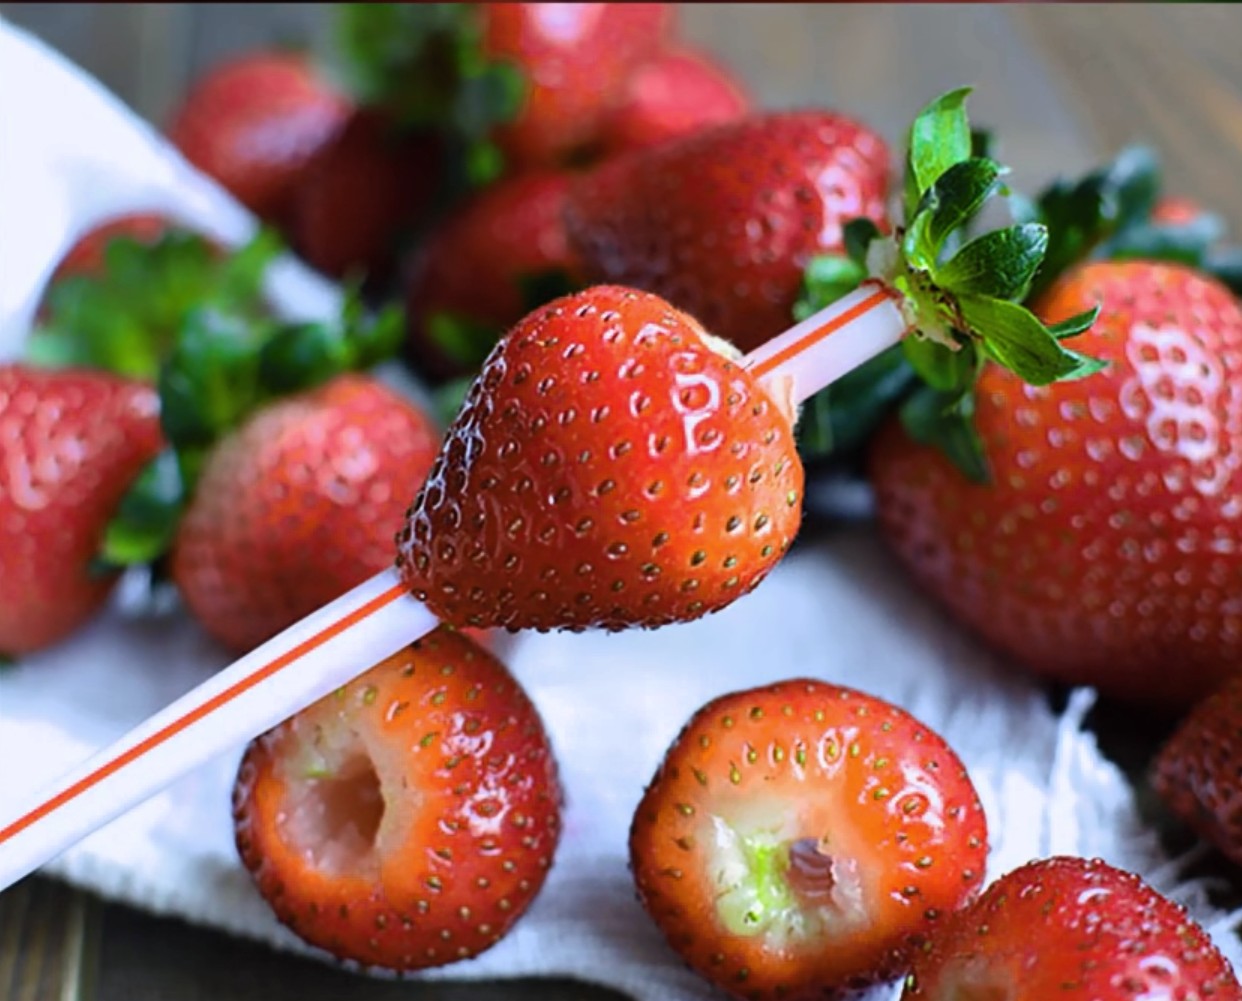 Use a straw to remove stems from the strawberries